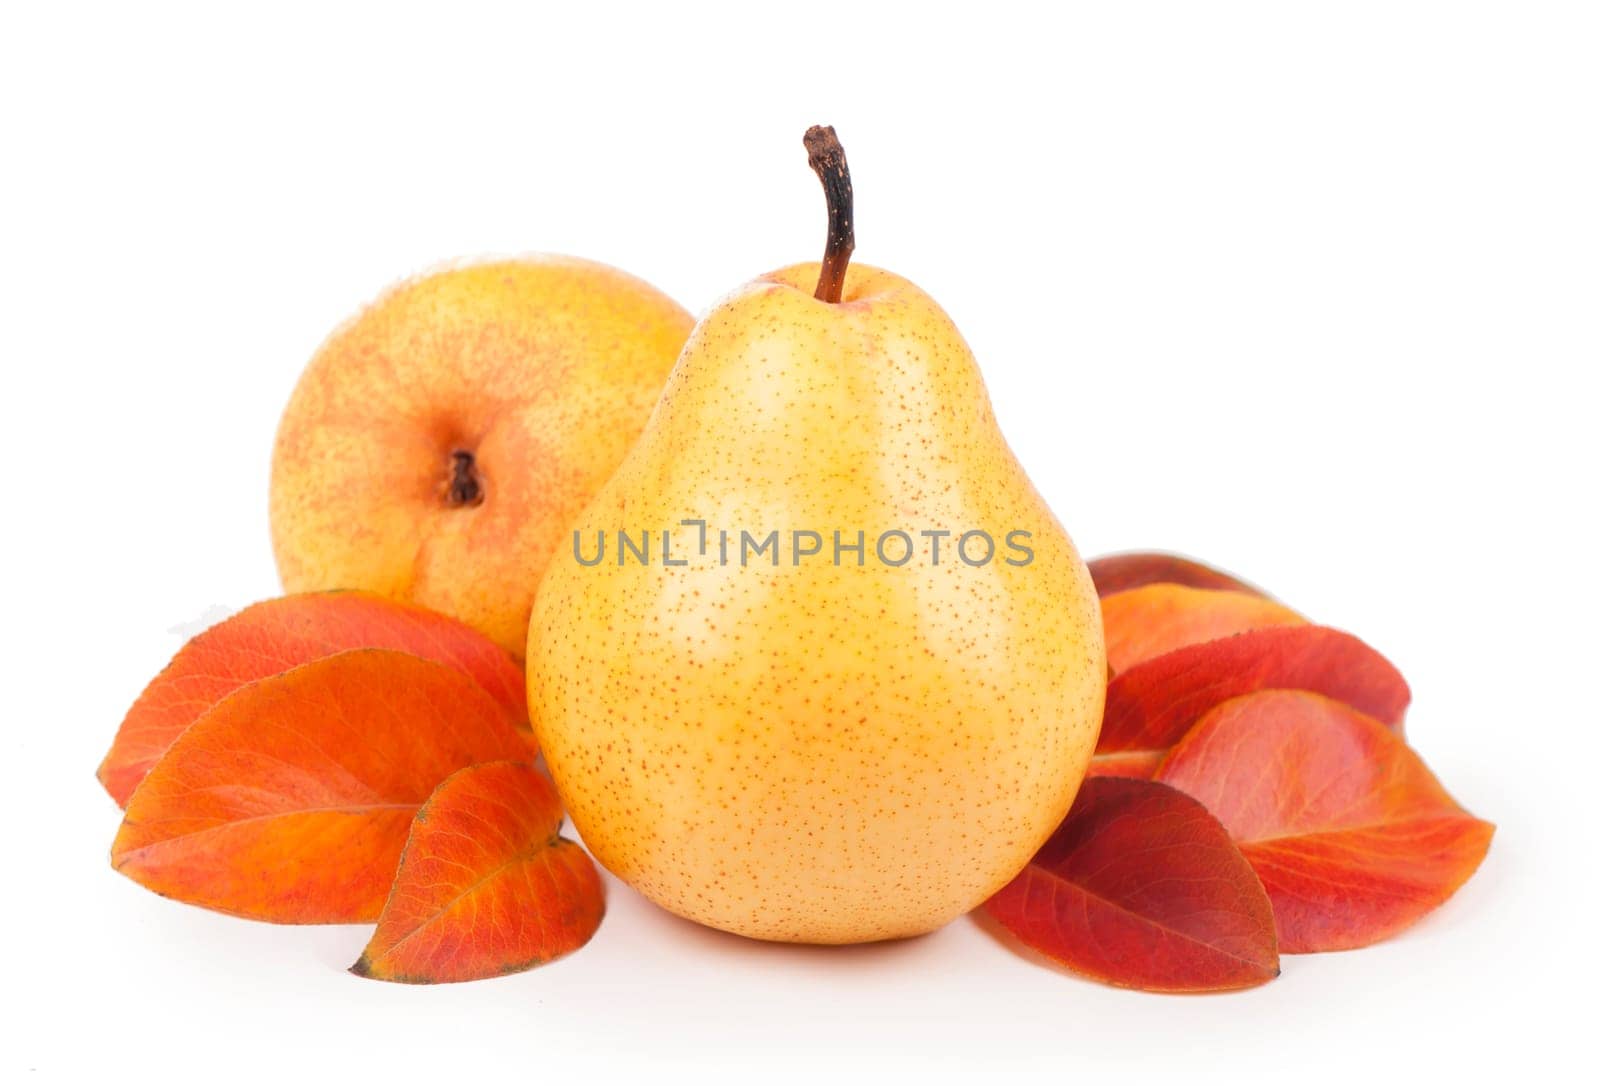 Fresh ripe fruits of pears with leaves isolated on white background by aprilphoto